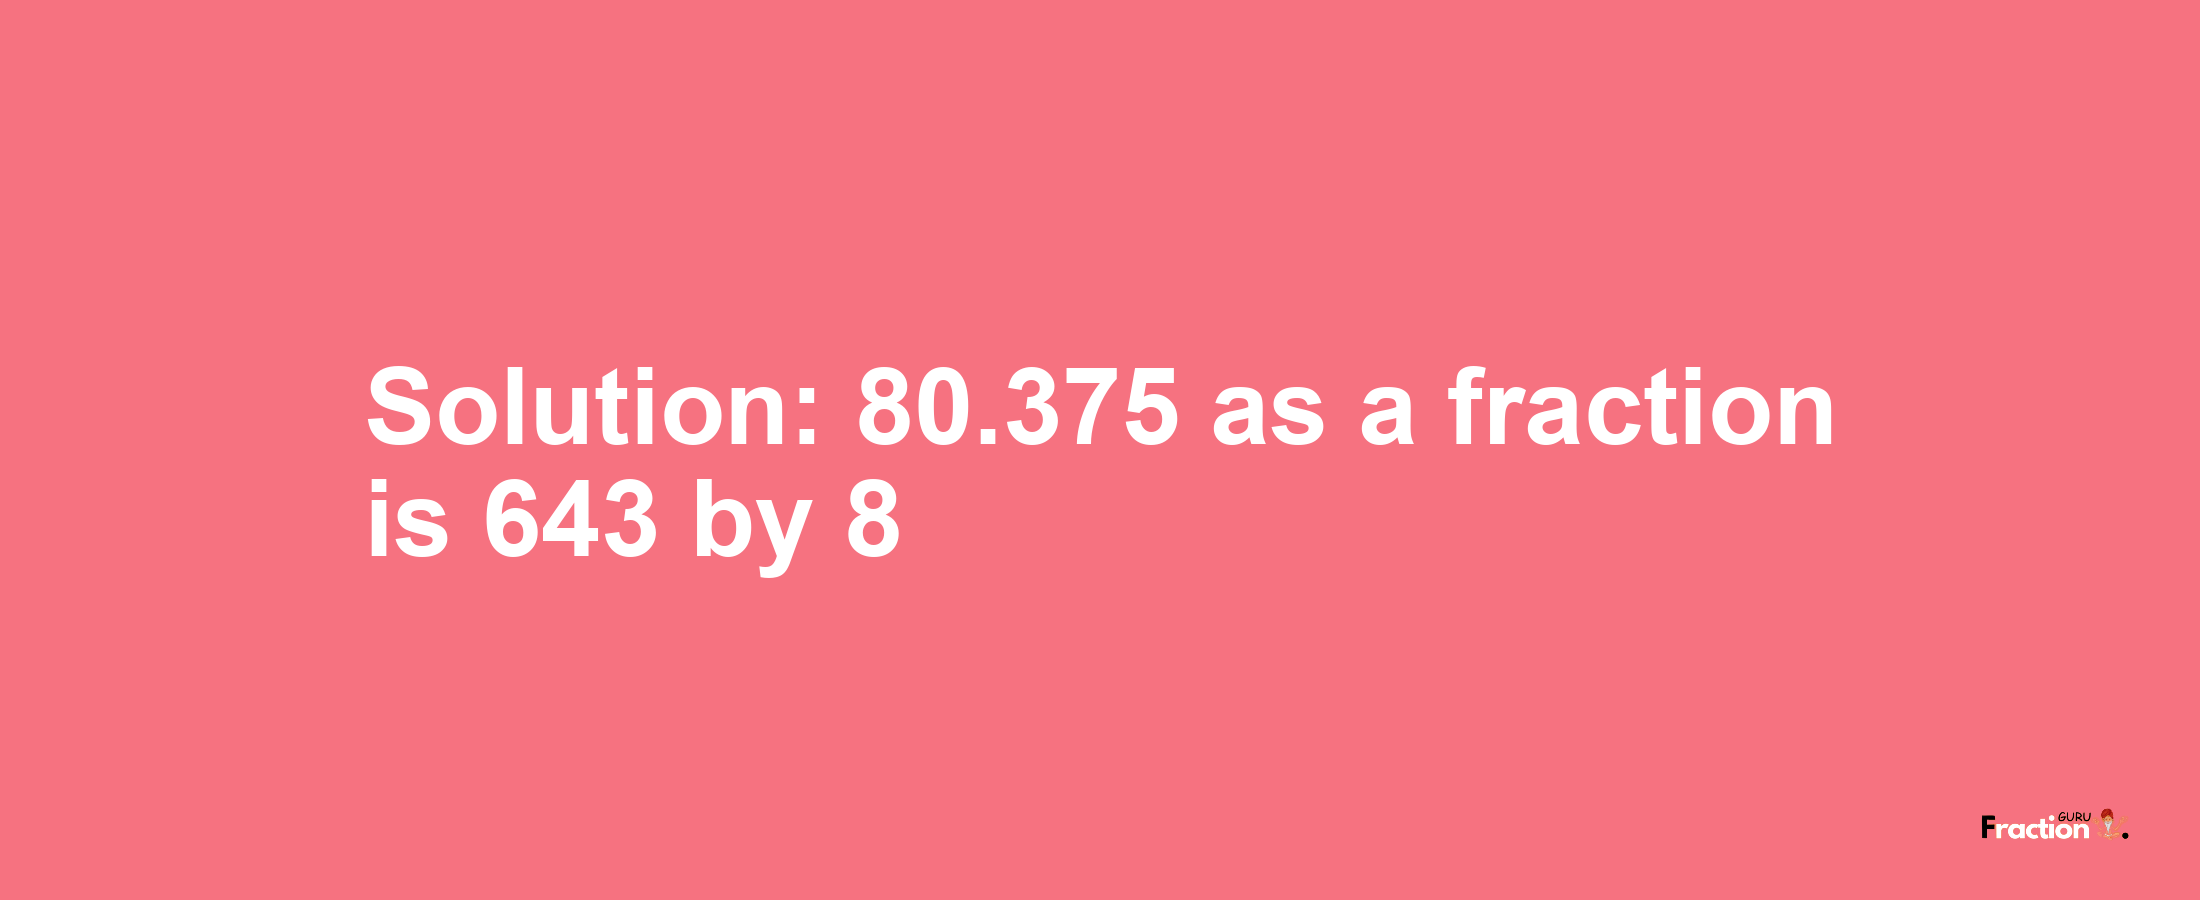 Solution:80.375 as a fraction is 643/8